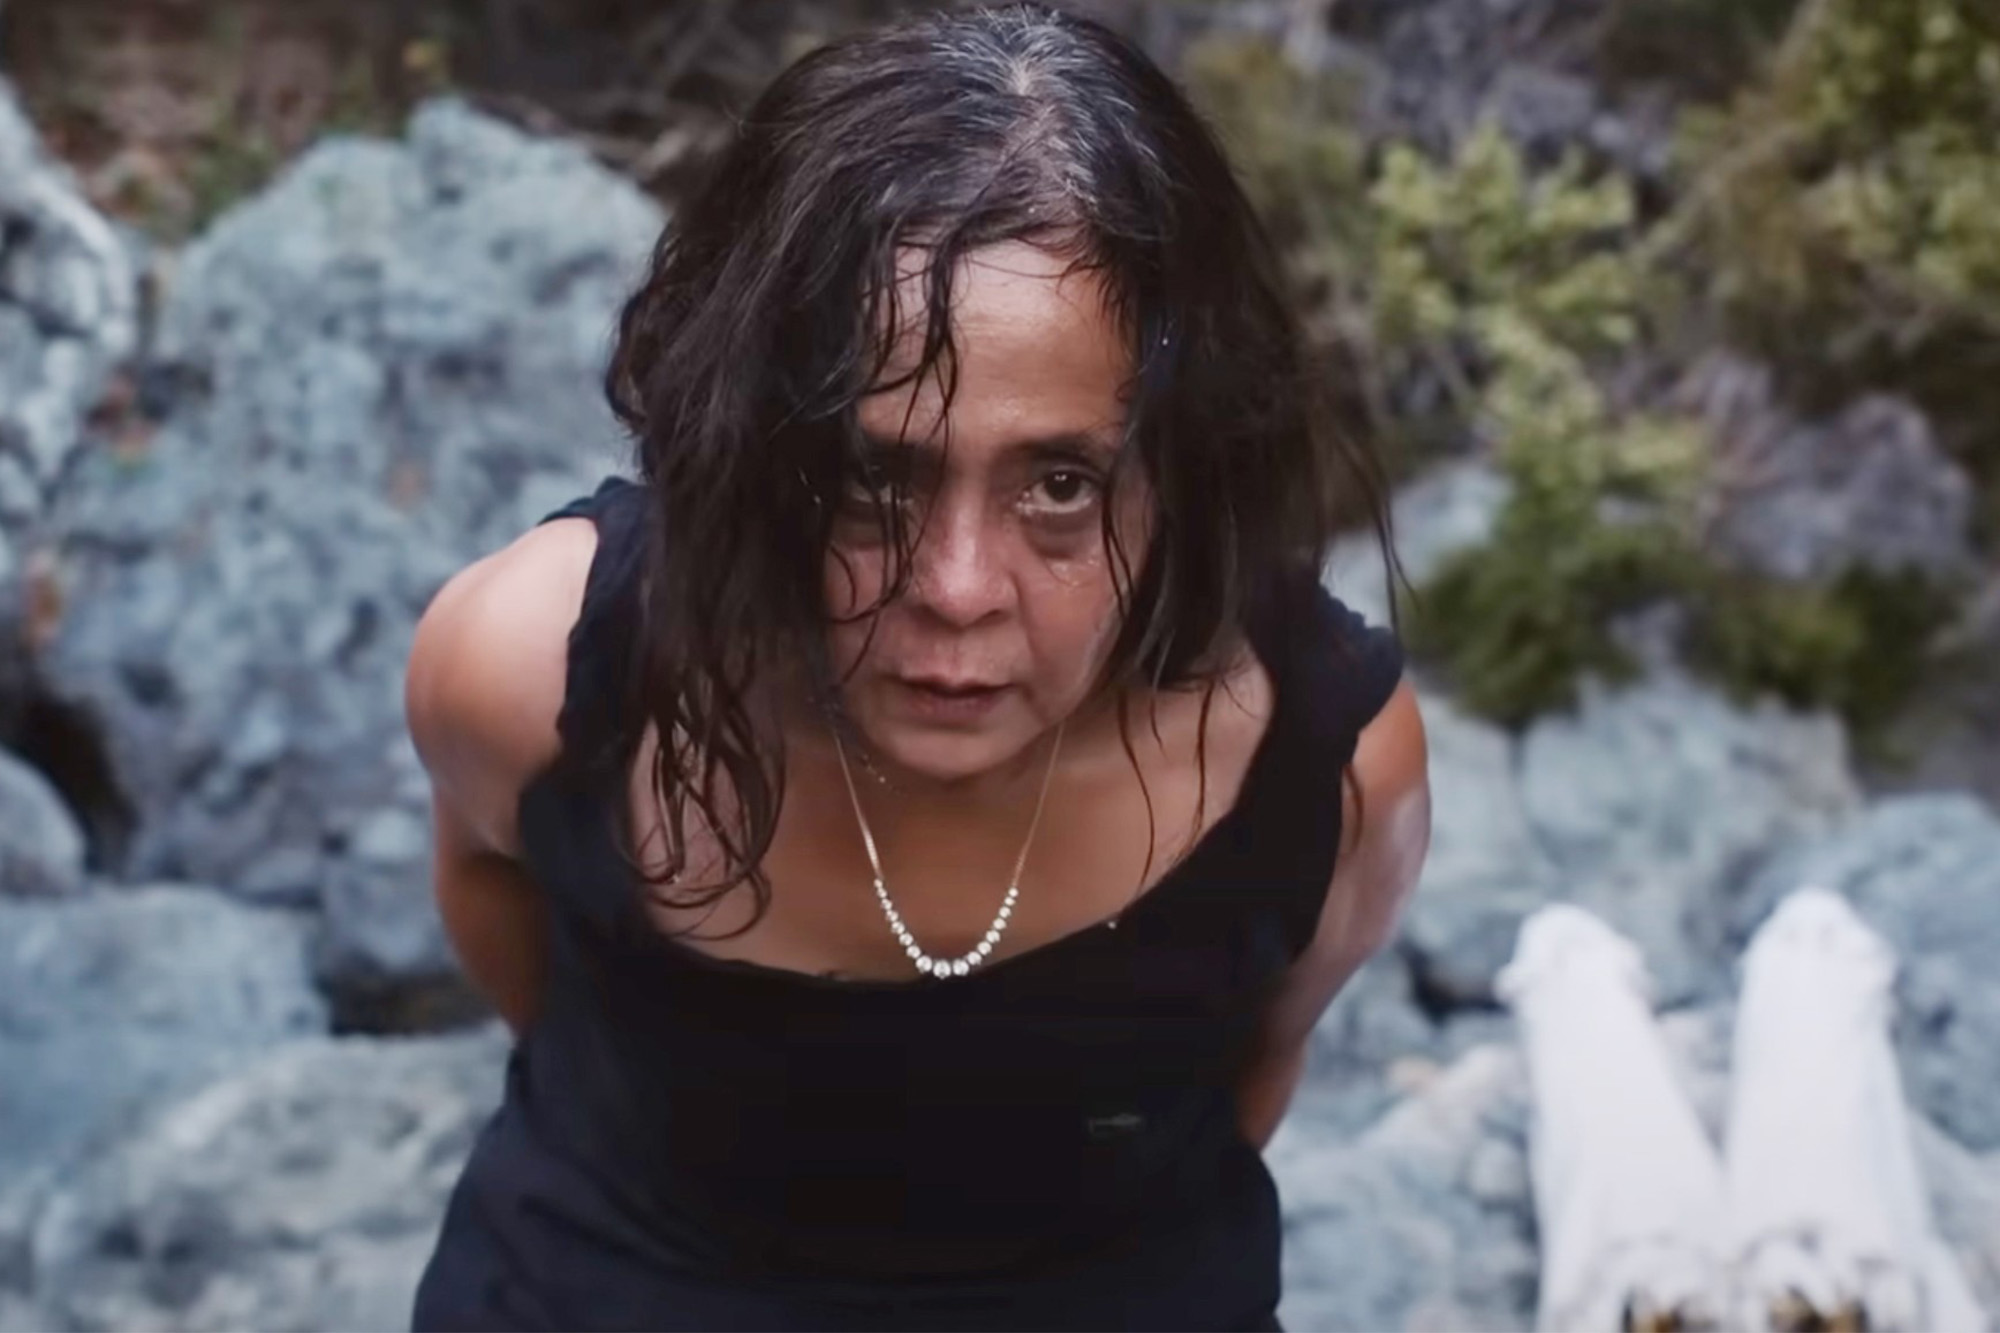 Dolly De Leon looks sweaty and wild-eyed as she hides something behind her back in Triangle of Sadness